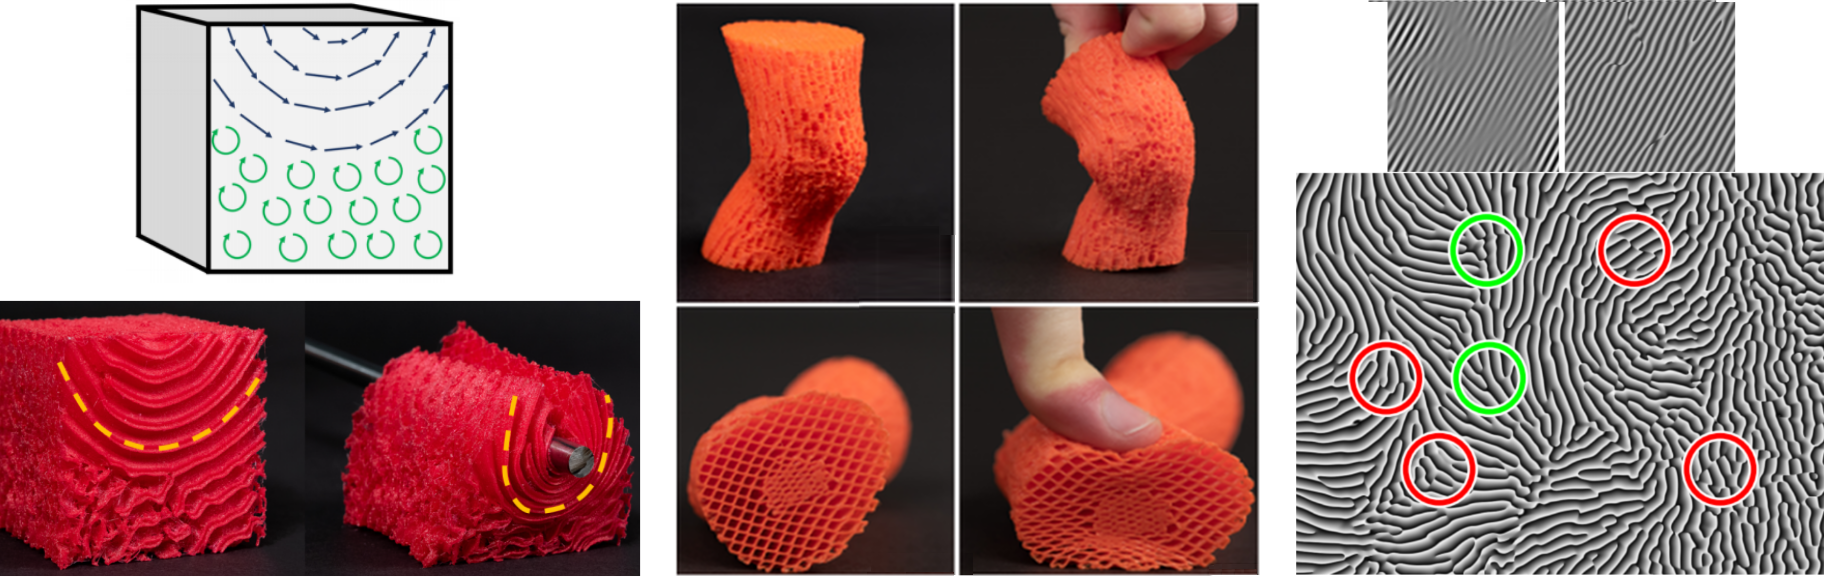 Left: Specification of the volumetric amount and direction of anisotropy, and result on a real 3D printed object. Middle: Example of a knee, which can only bend as expected, and reproducing the rigid bones. Right: Two types of discontinuitie appearing when turning Gabor noise into Phasor noise, that we needed to sweep away to produce a seemless microstructure.Video: https://www.youtube.com/watch?v=RBQ4y6VGQO8